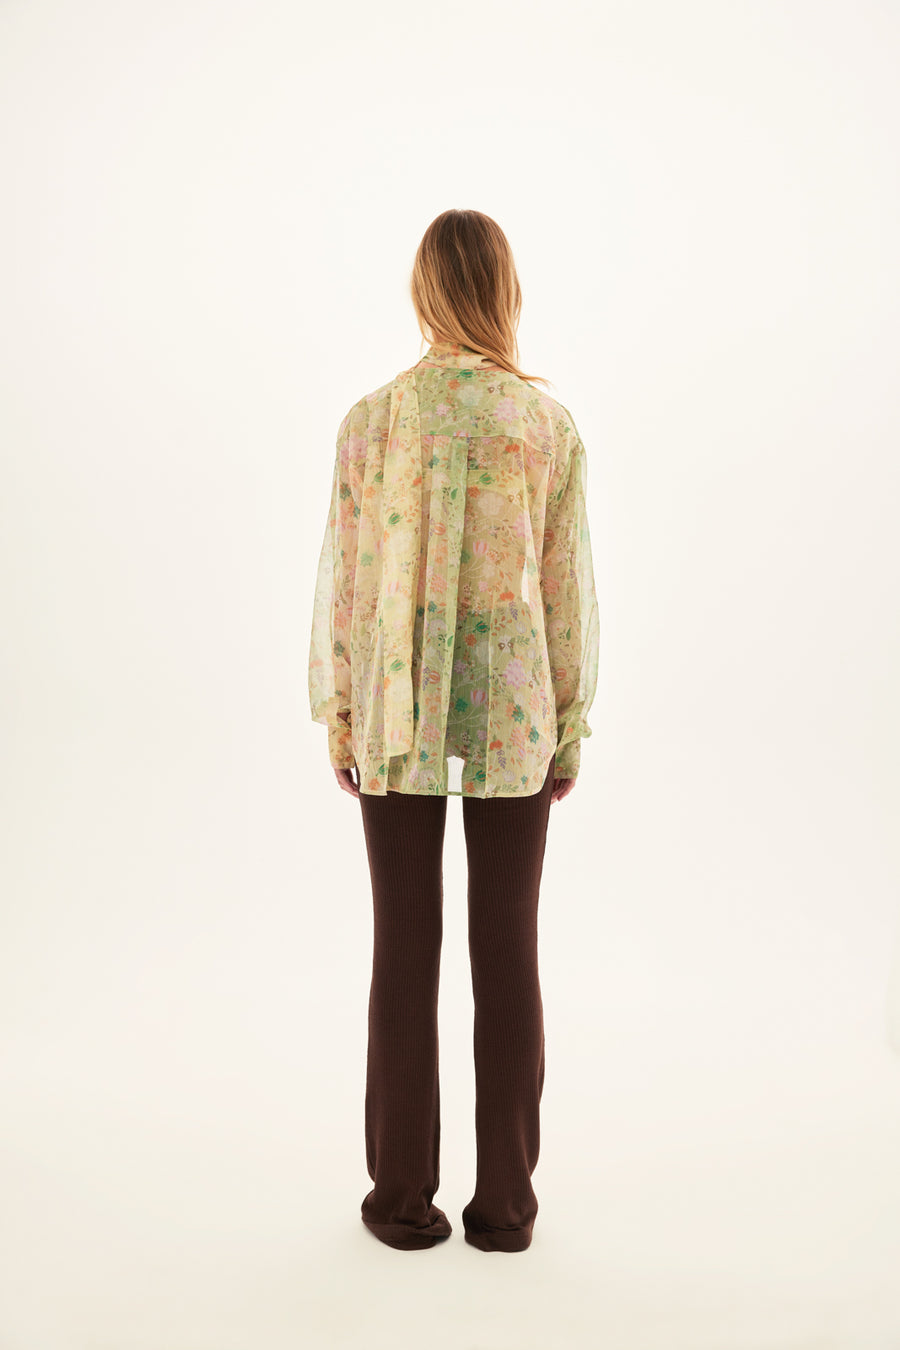 ALAIA - Floral printed shirt with necktie